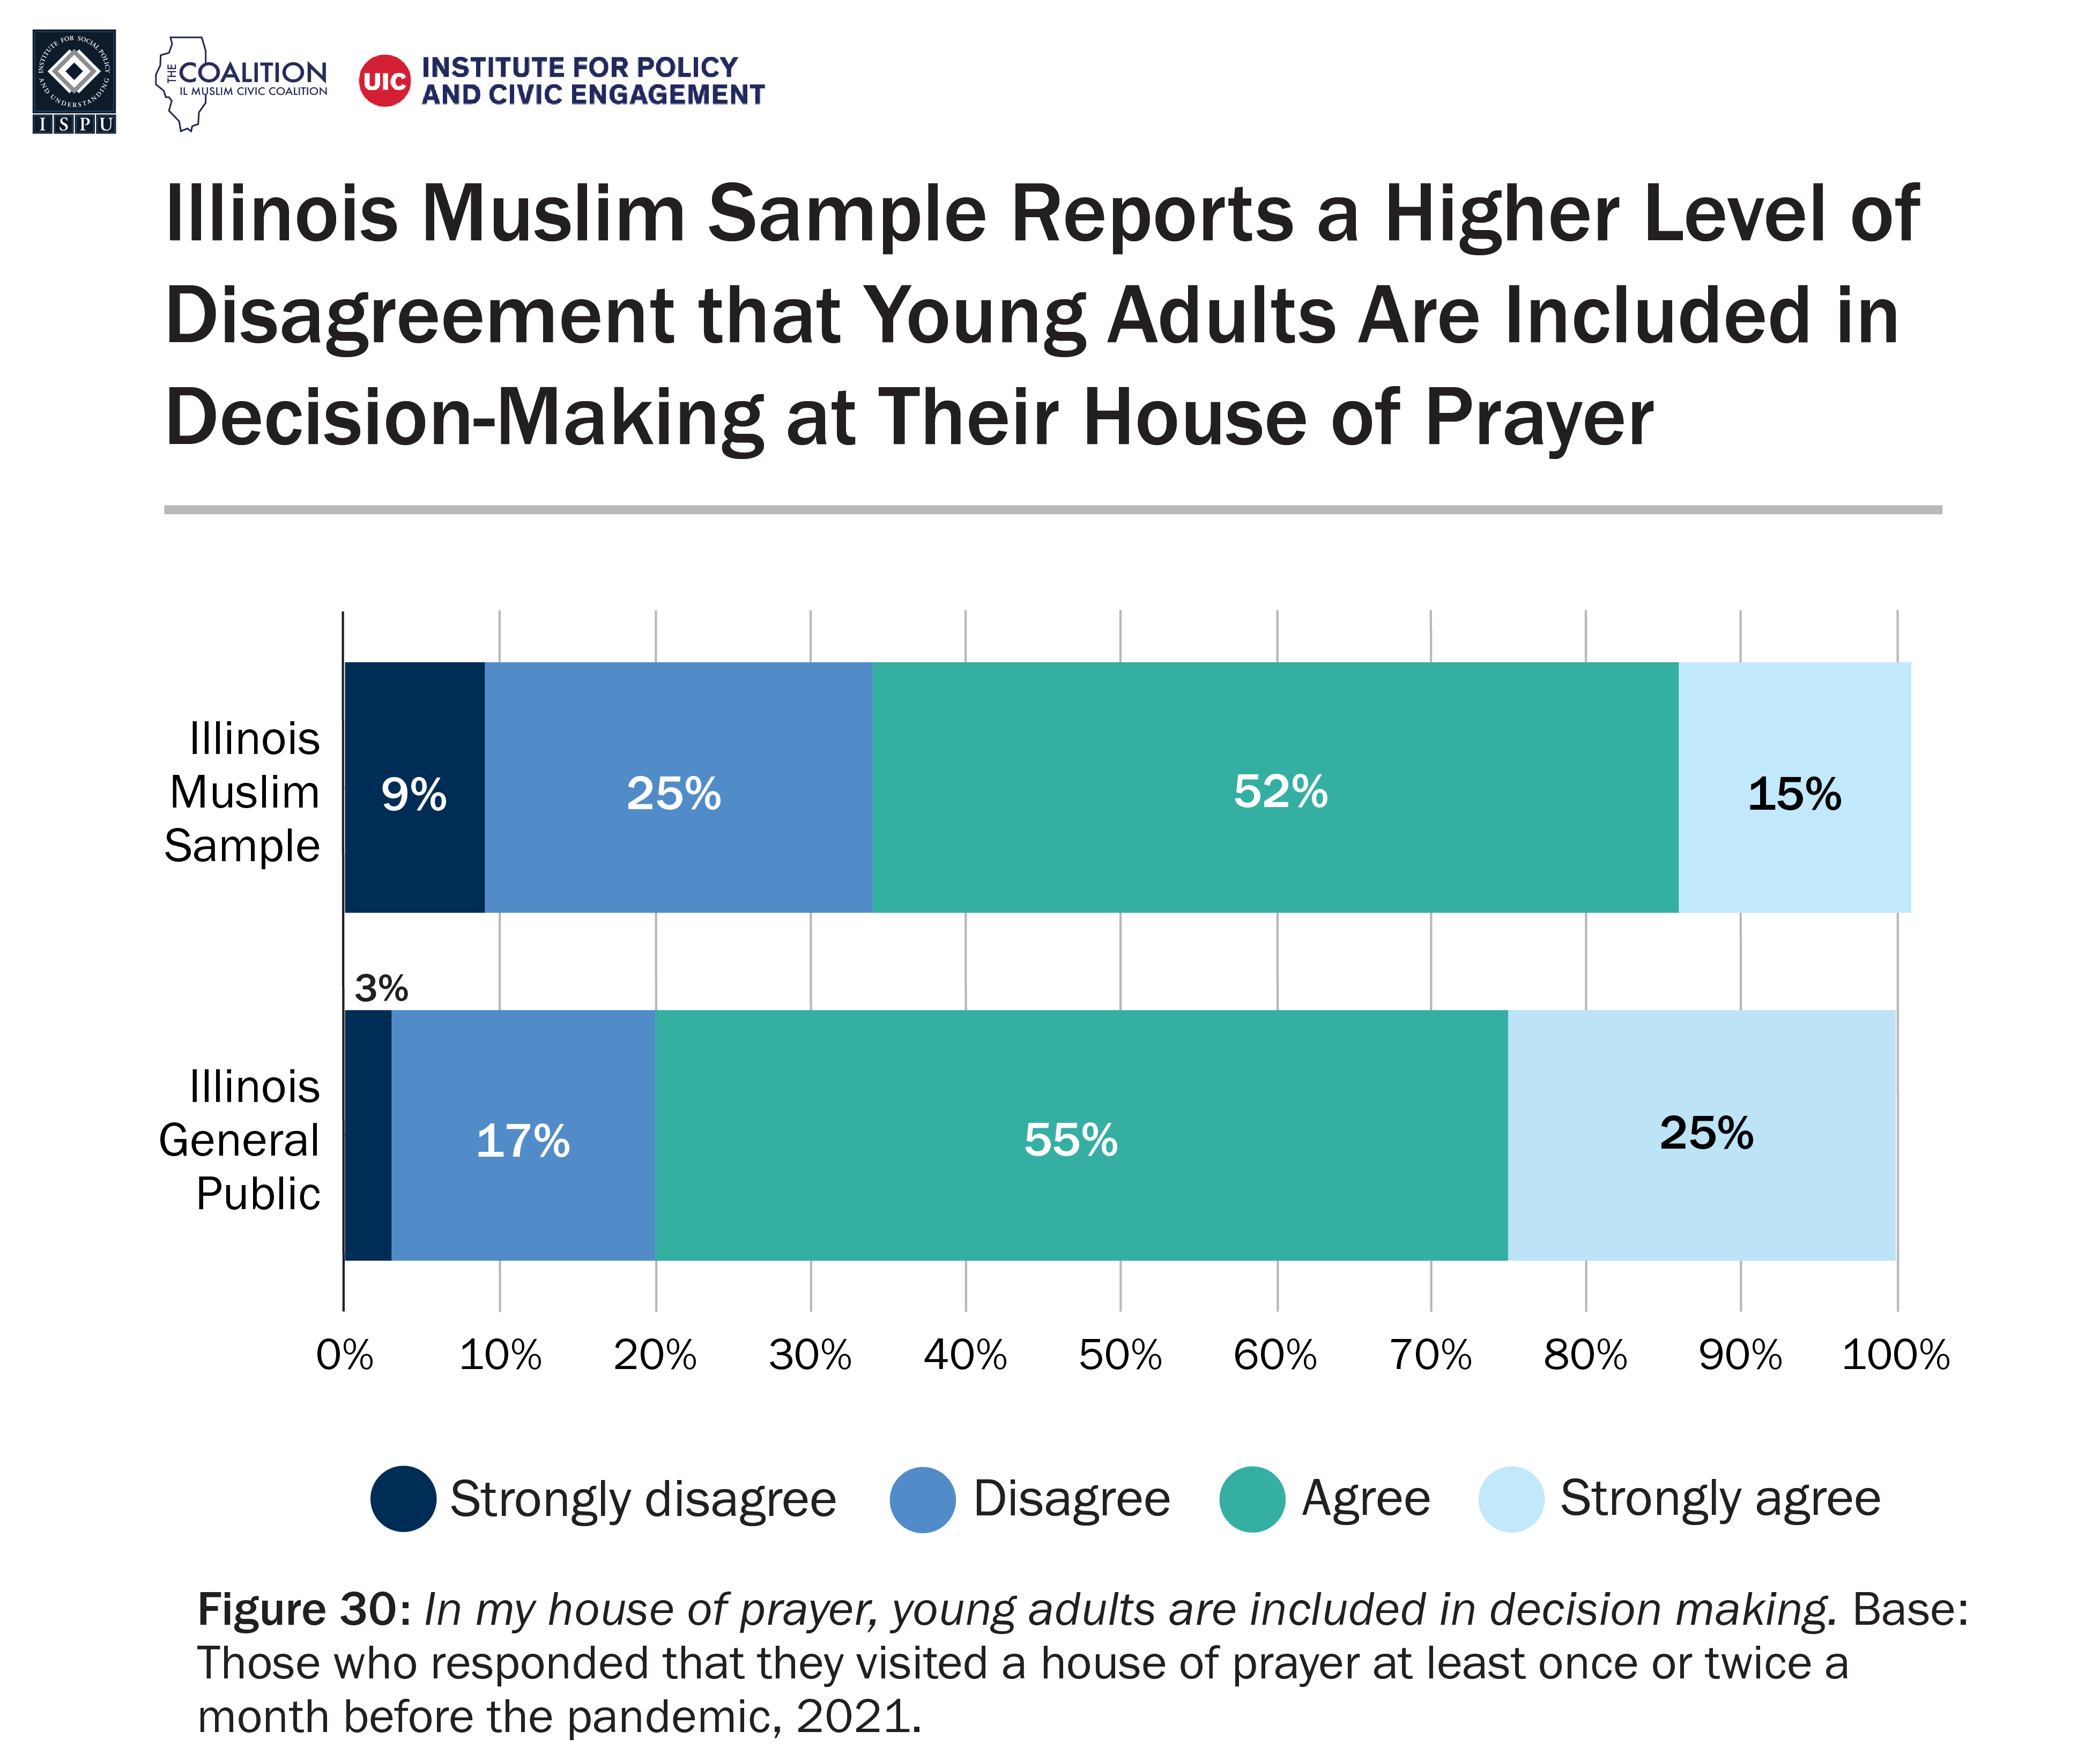 A bar graph showing the level of agreement with the statement “In my house of prayer, young adults are included in decision making” among the Illinois Muslim sample and Illinois general public